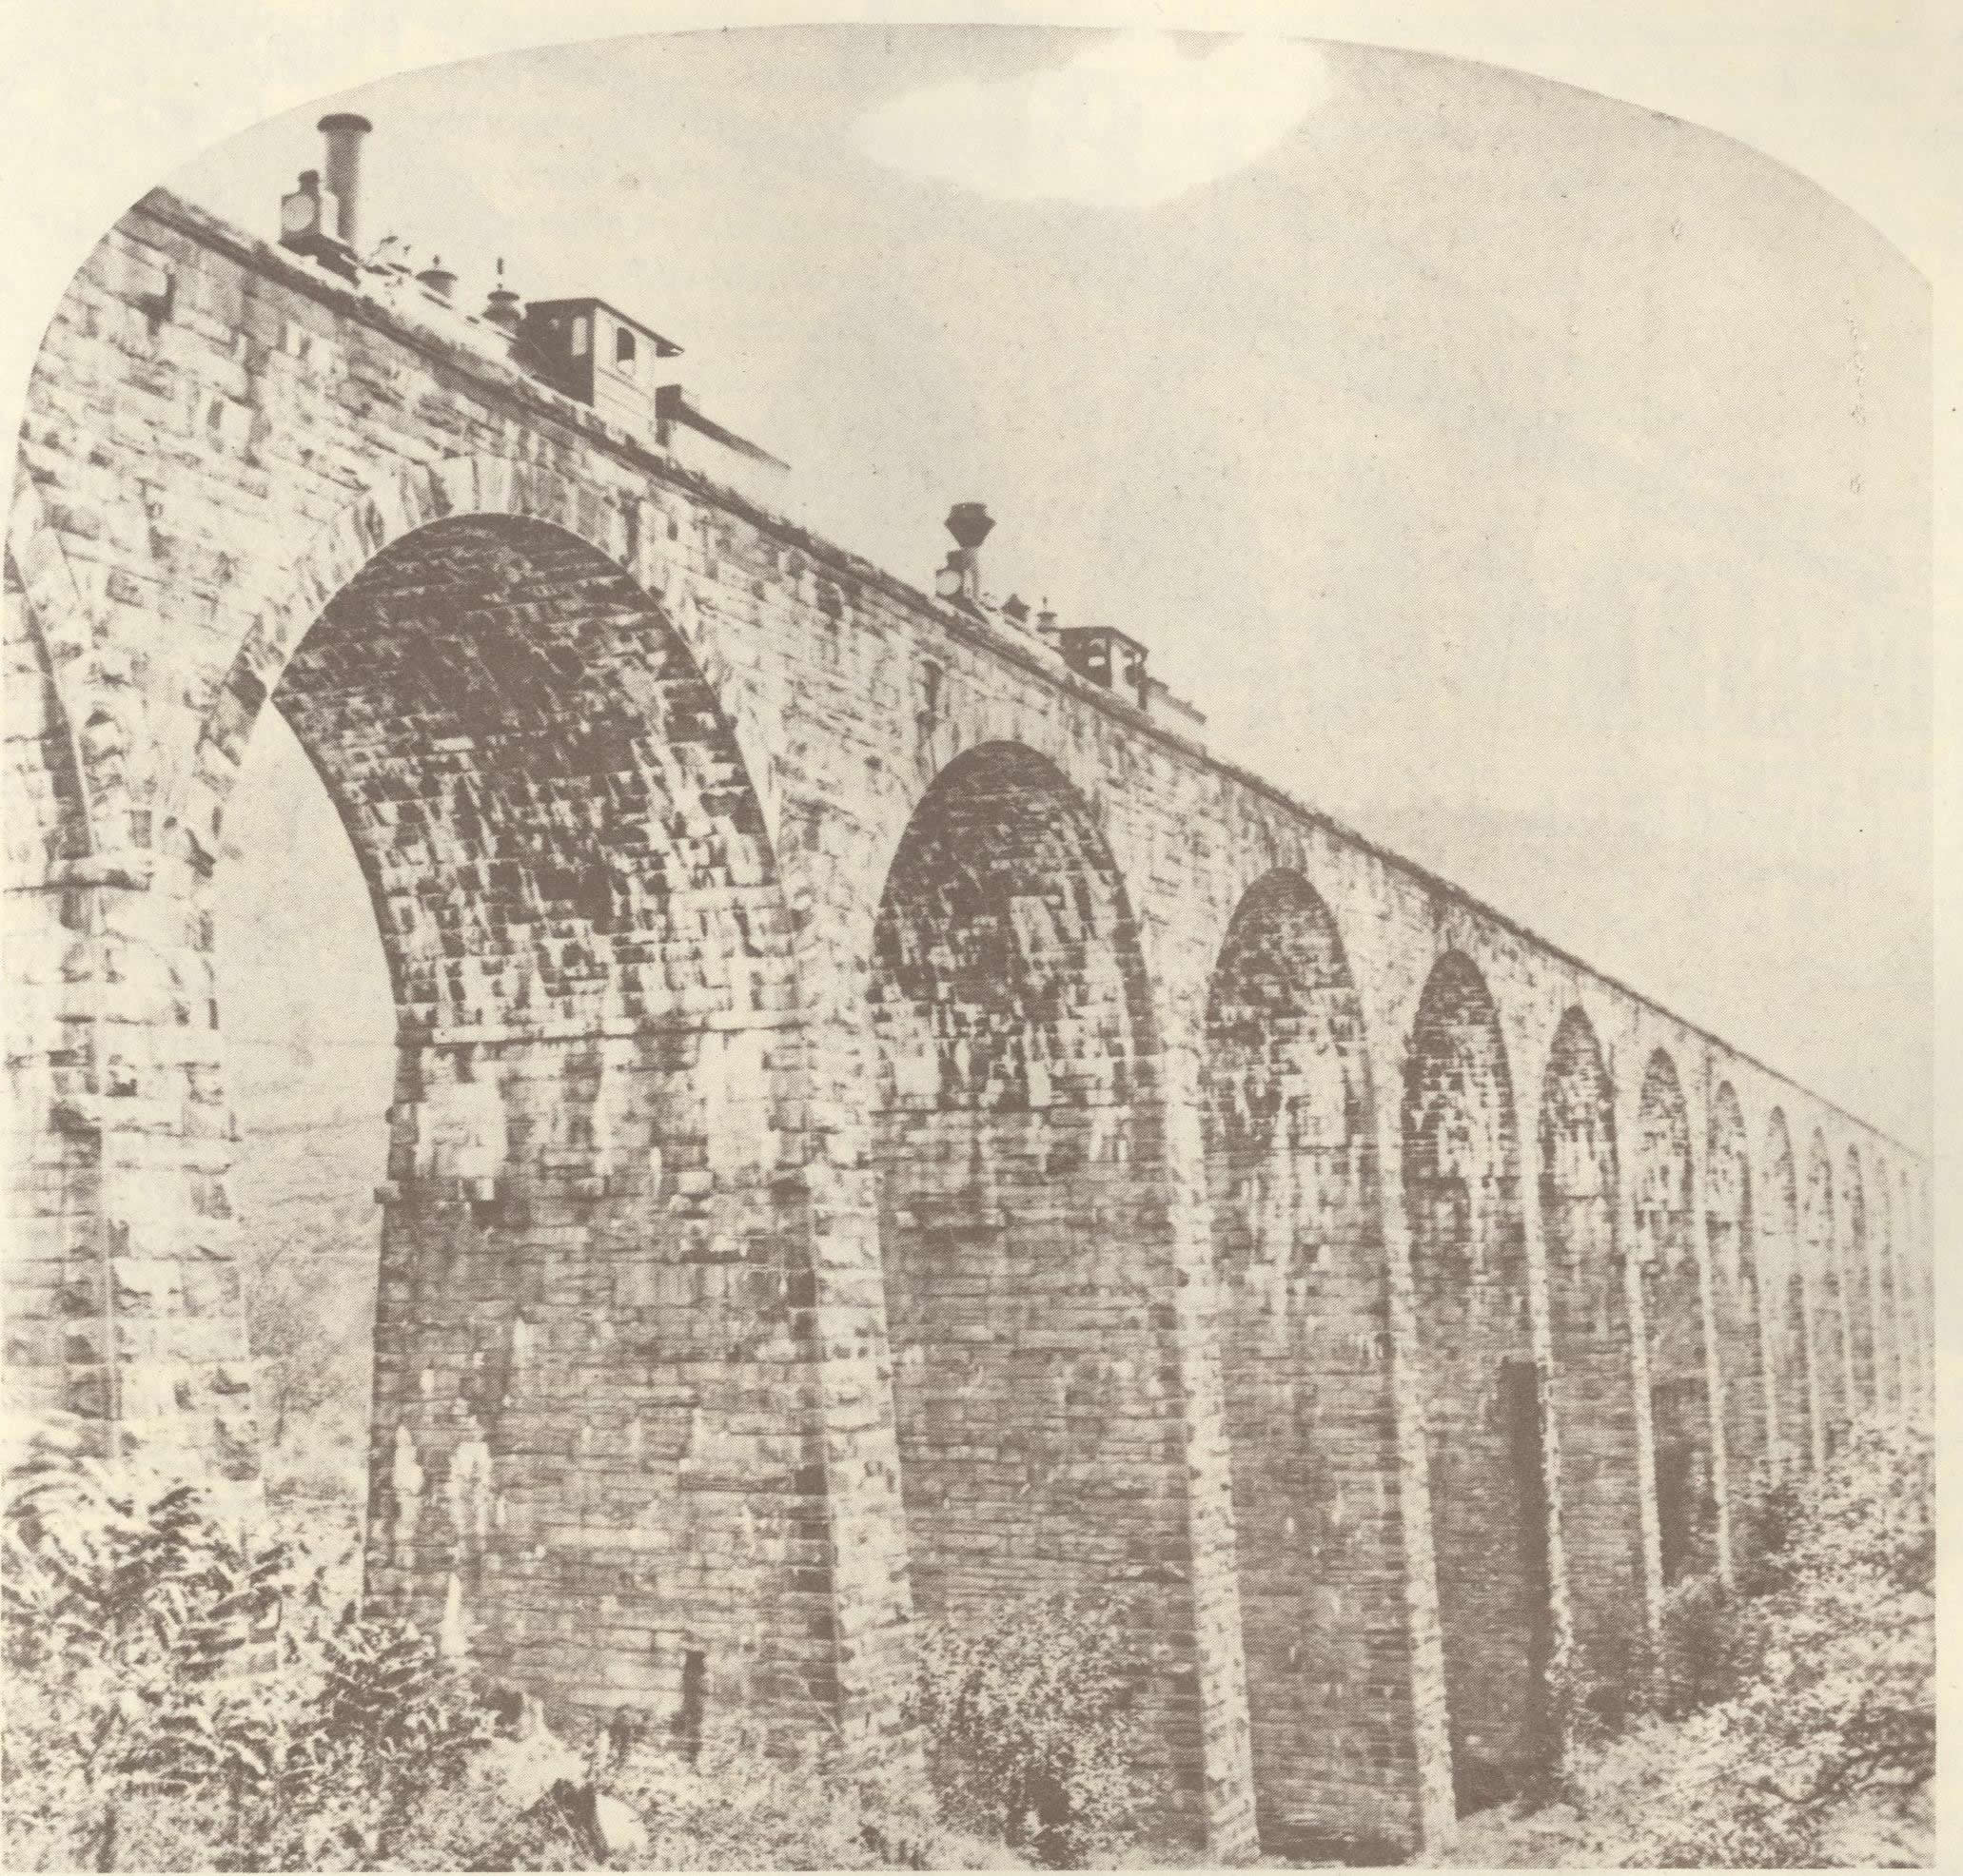 Two trains on the Viaduct